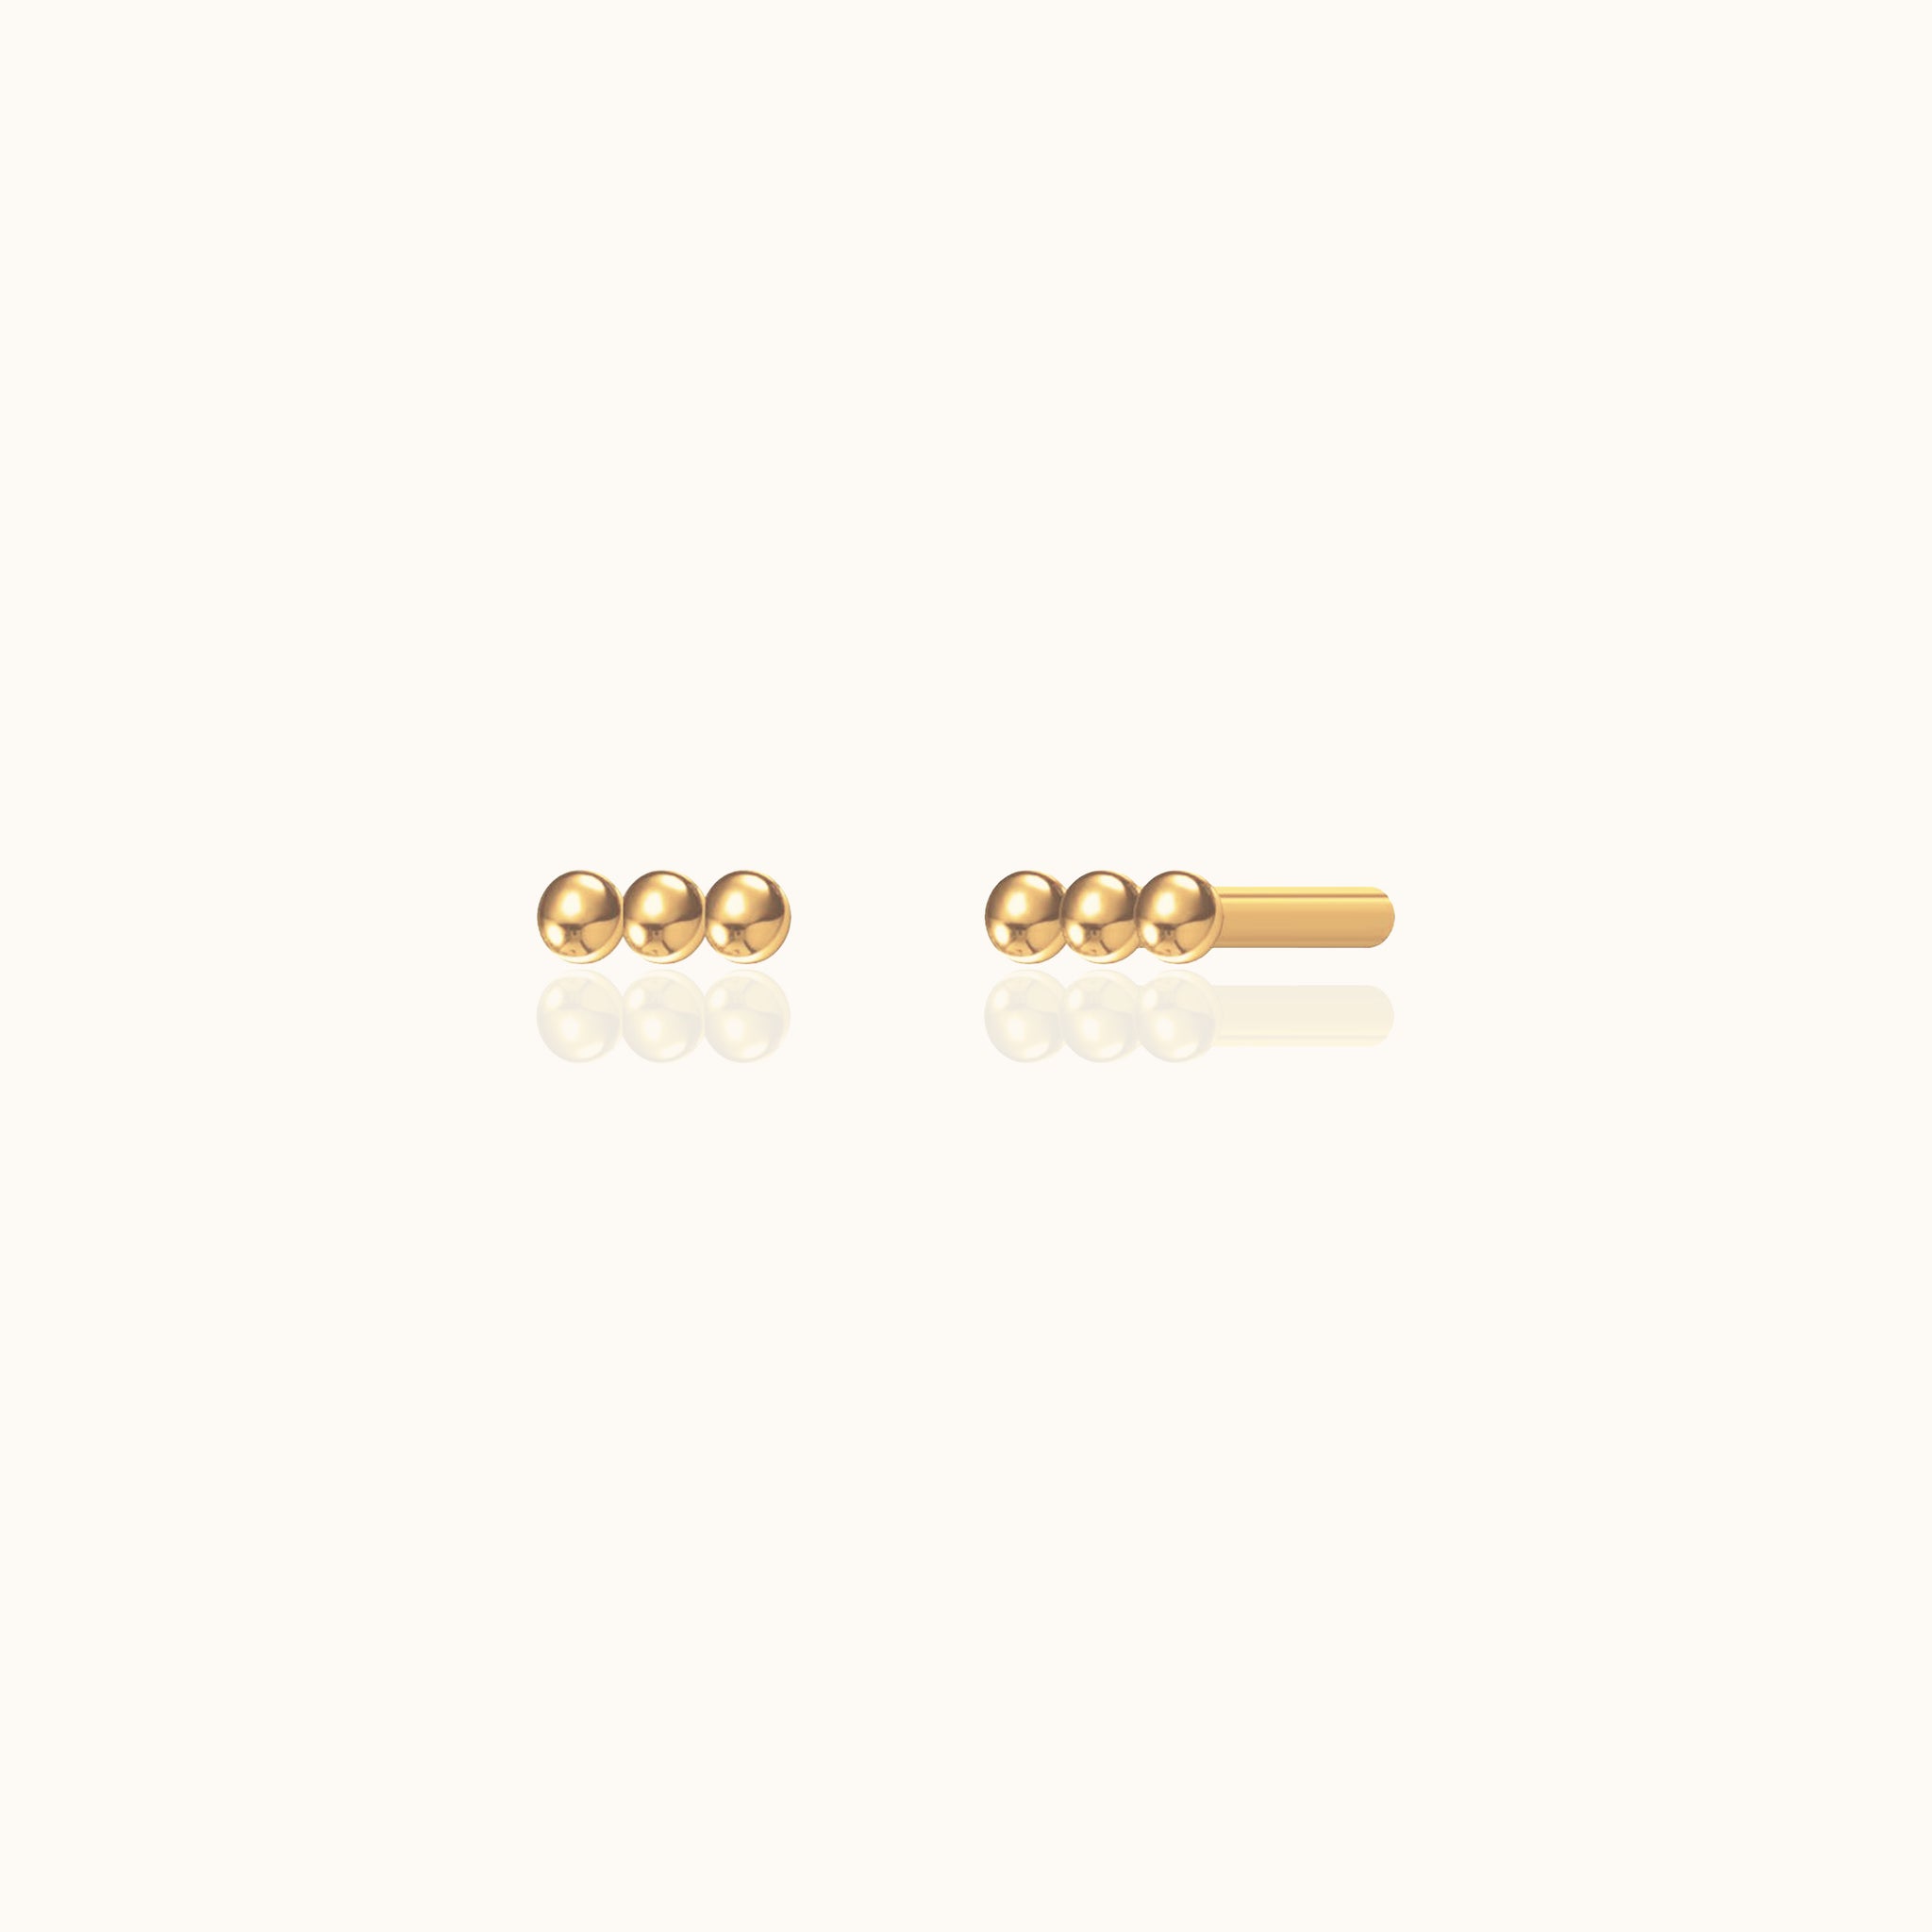 Gold Ball Spheres Bar Cartilage Petite Tri Dots Bead Bar Stud Earrings by Doviana